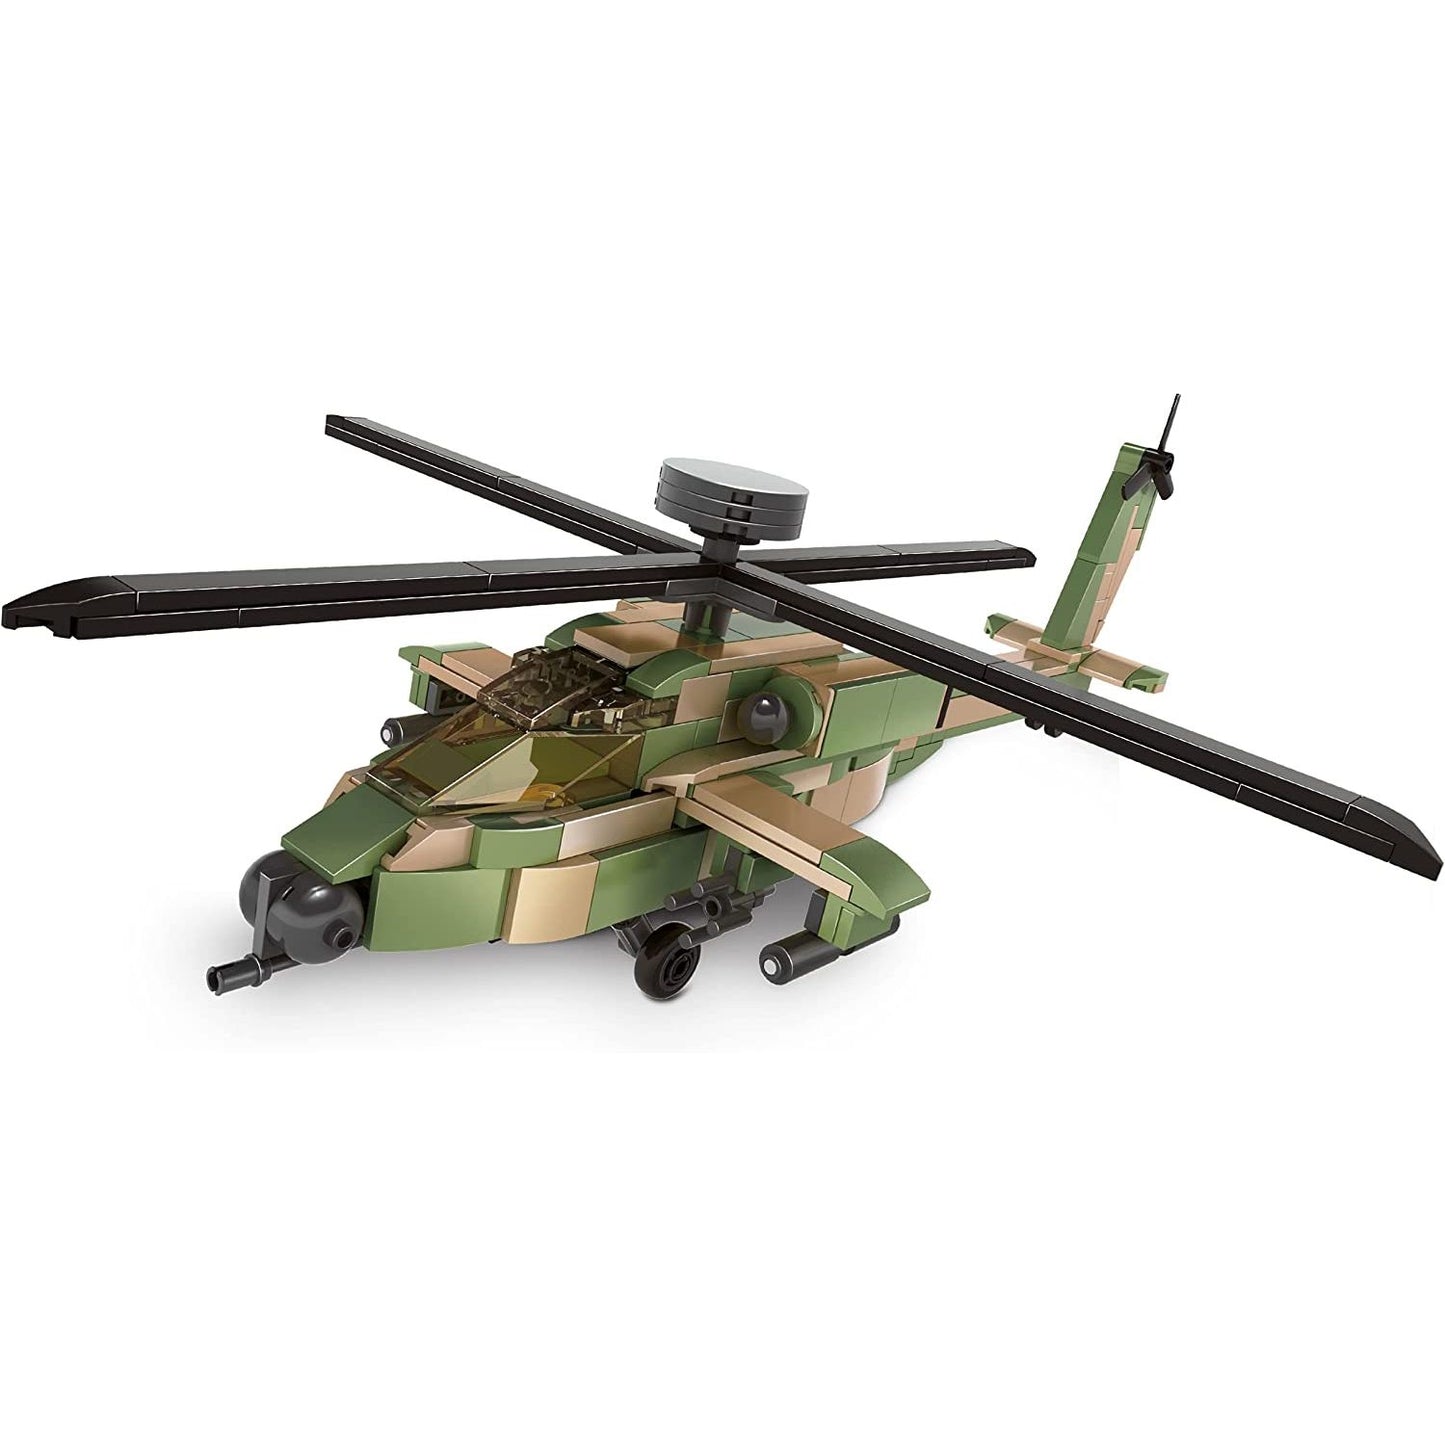 Dragon Blok - Aircraft - AH-64 Helicopter - 311 Pieces